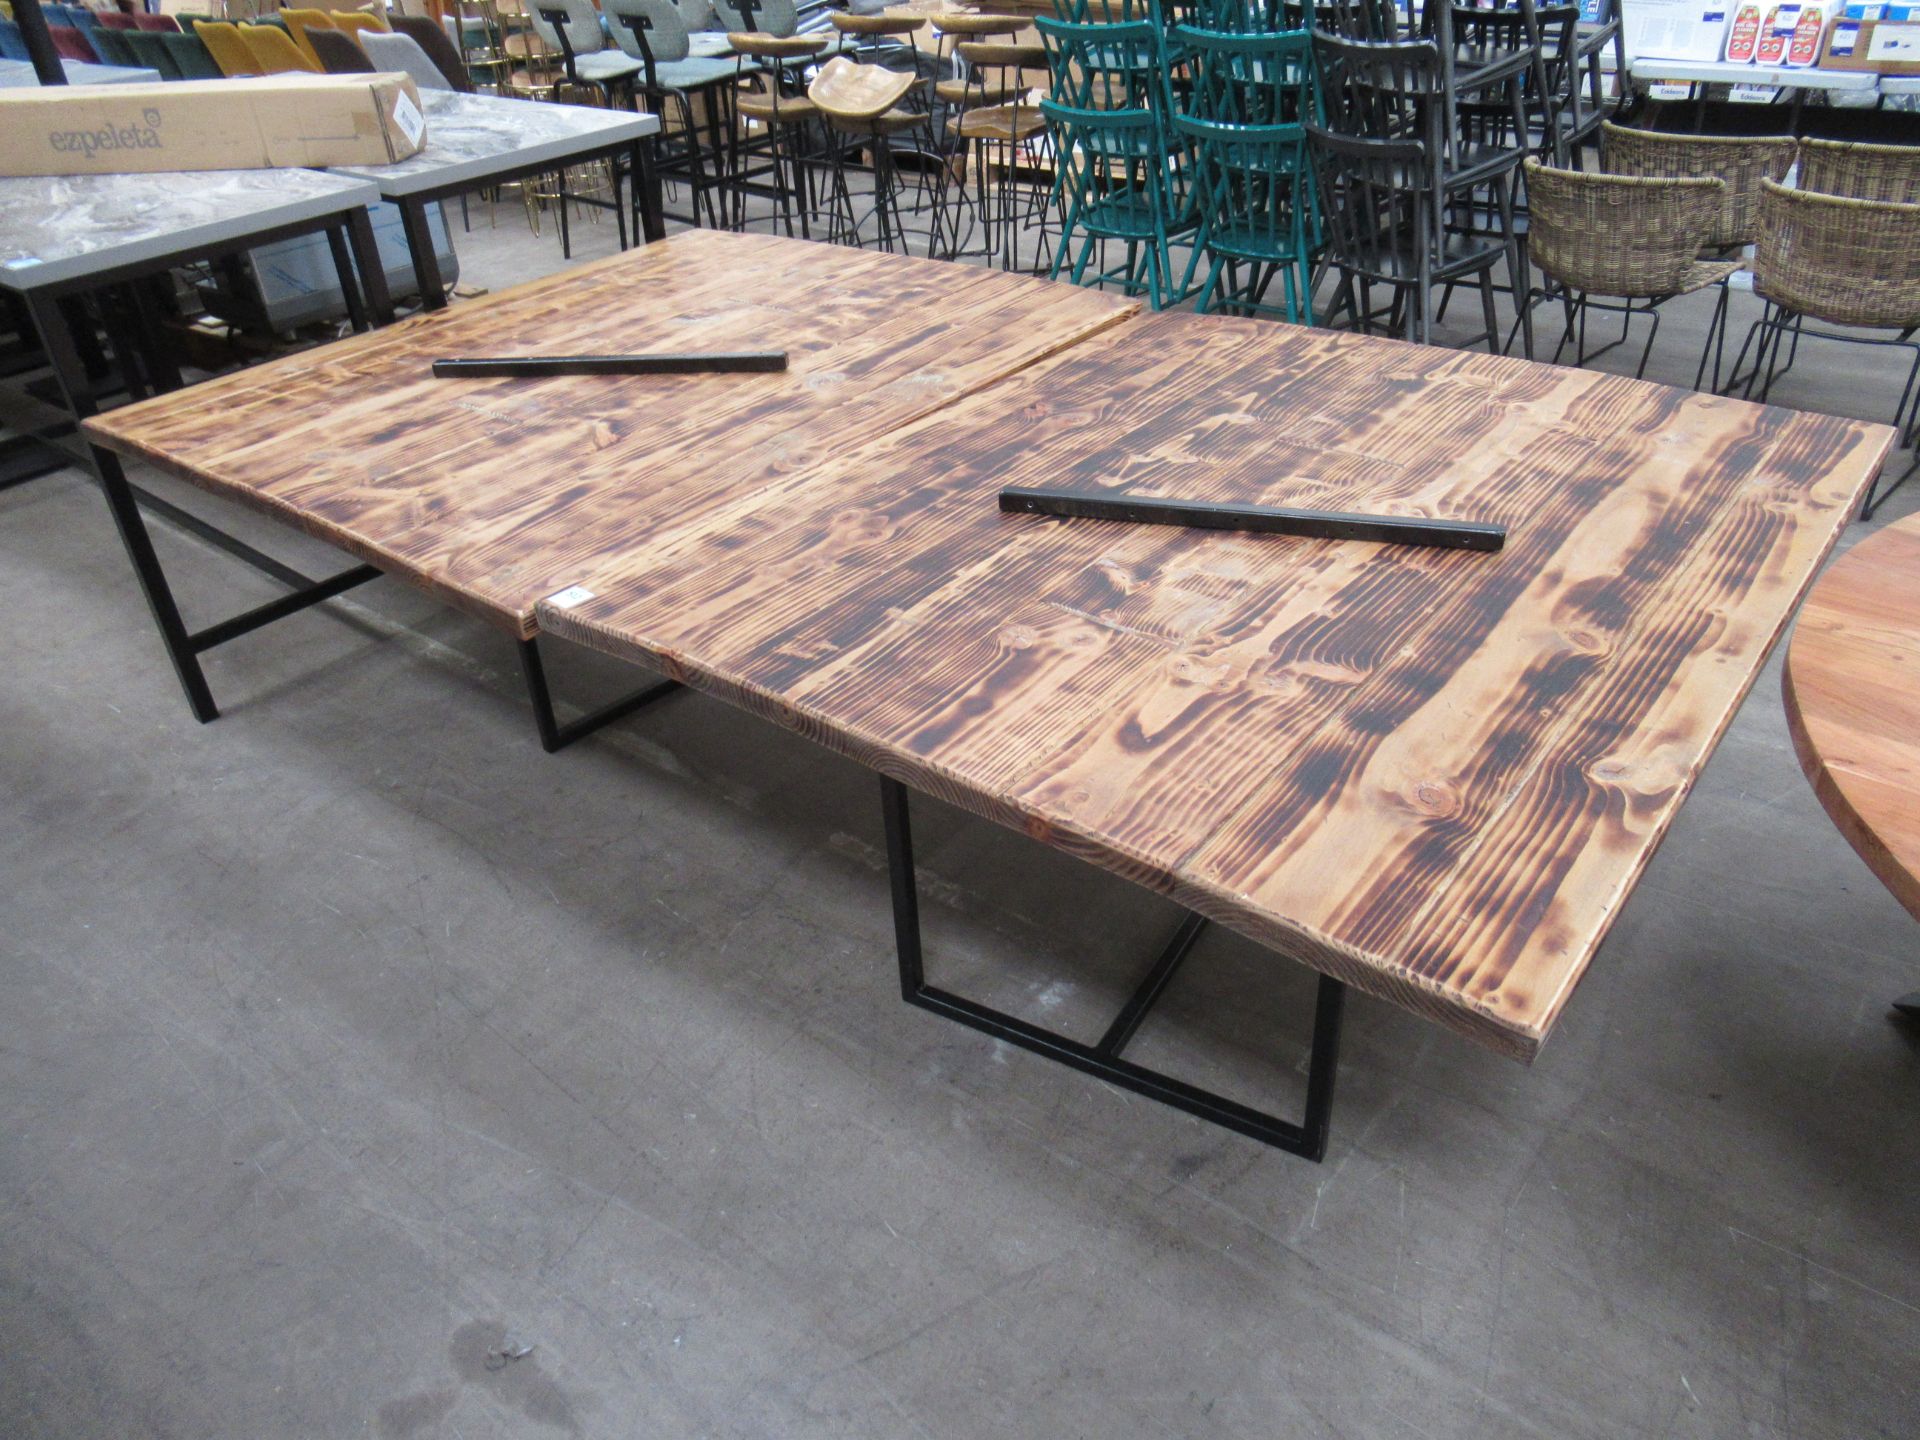 Large Rustic Effect Table (2x Parts) (3200/1600 x 1370mm)